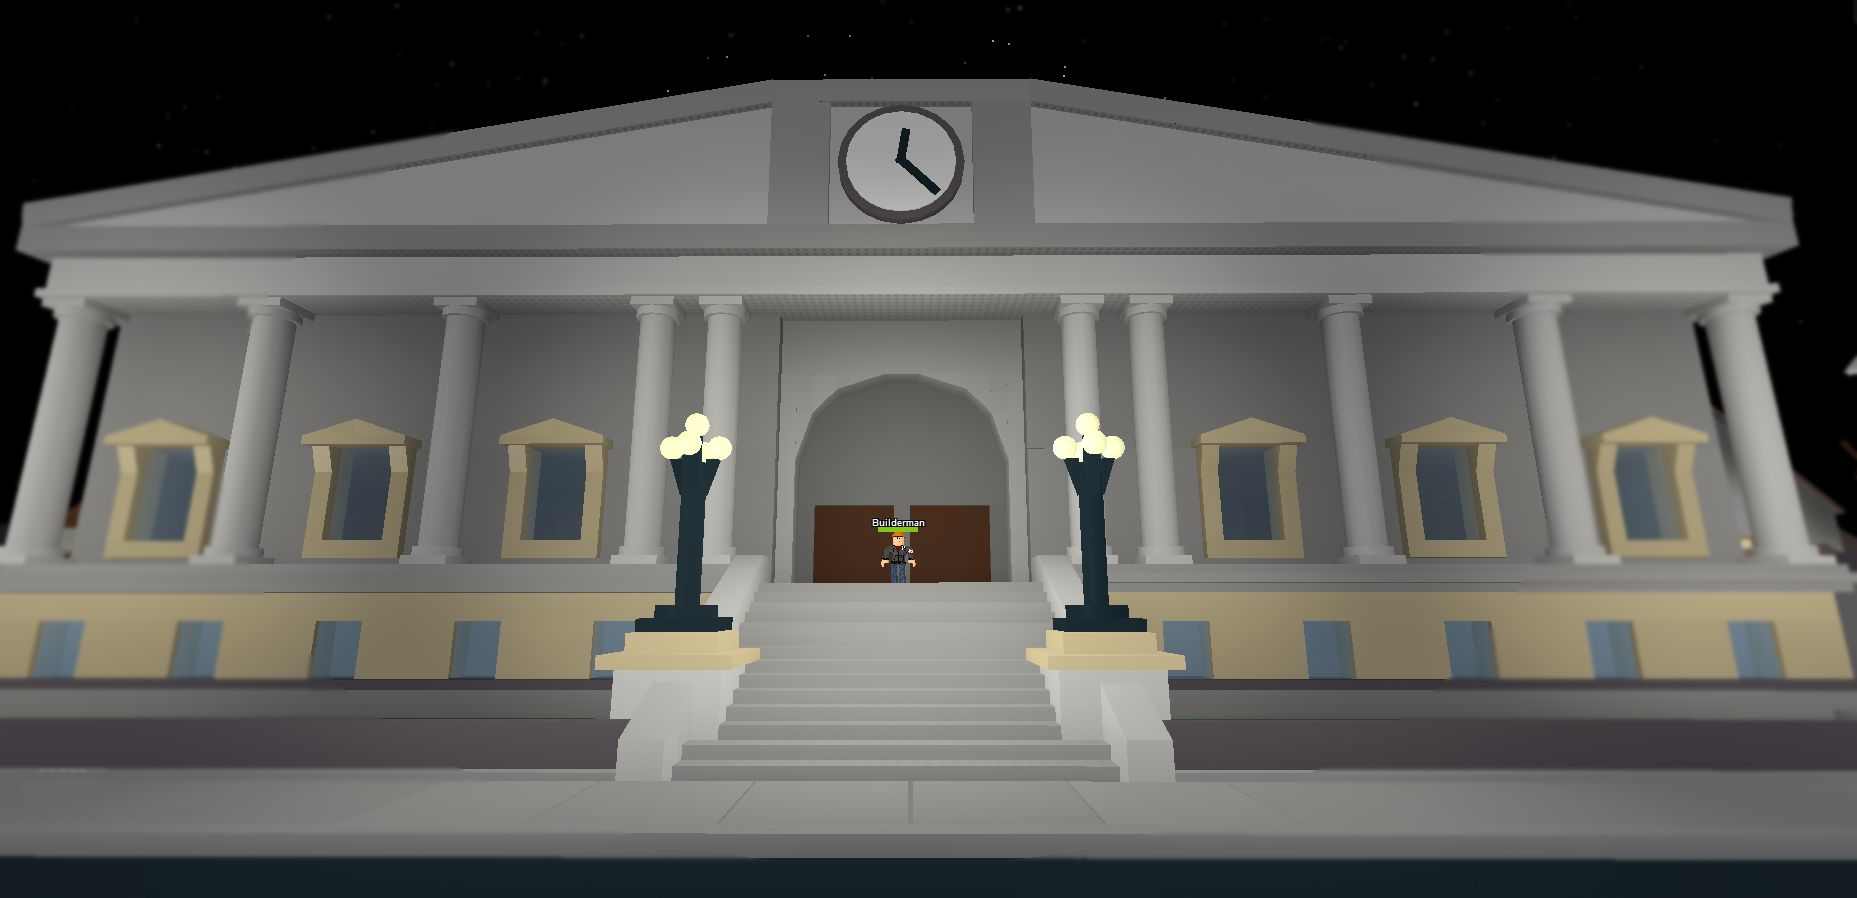 Introducing Roblox Halloween 2013 The Witching Hour Roblox Blog - roblox witching hour